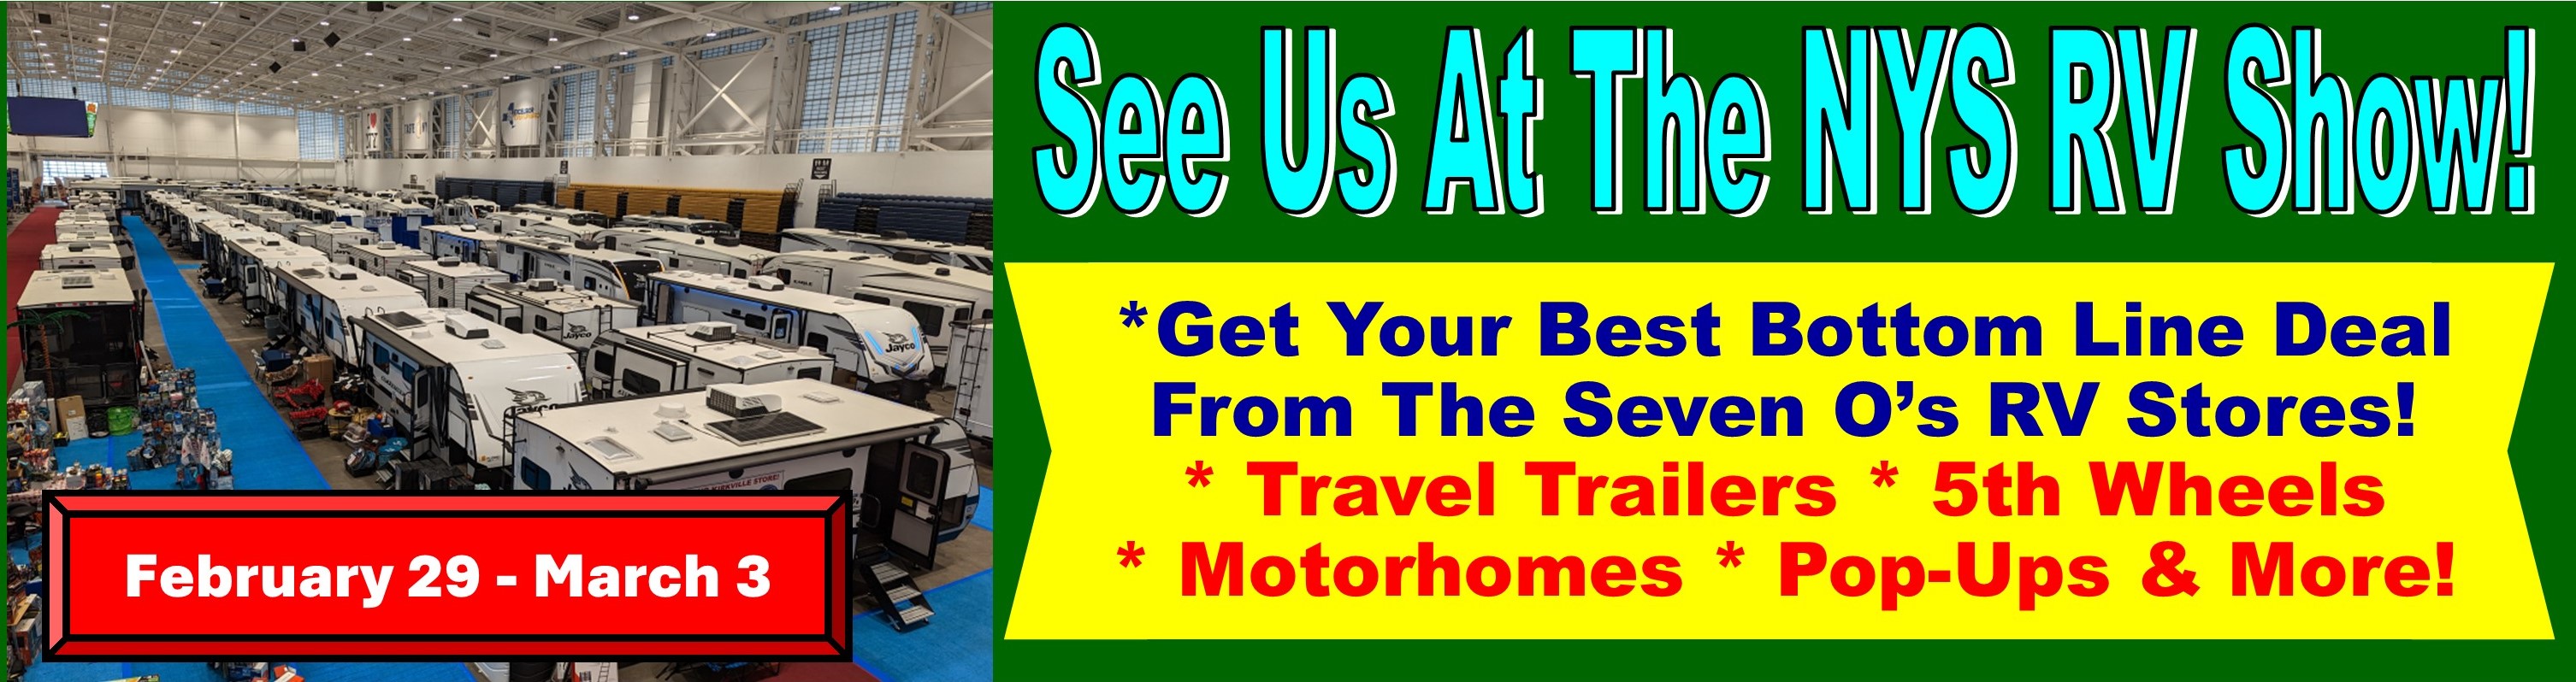 See Us At The NYS RV Show Spring 24